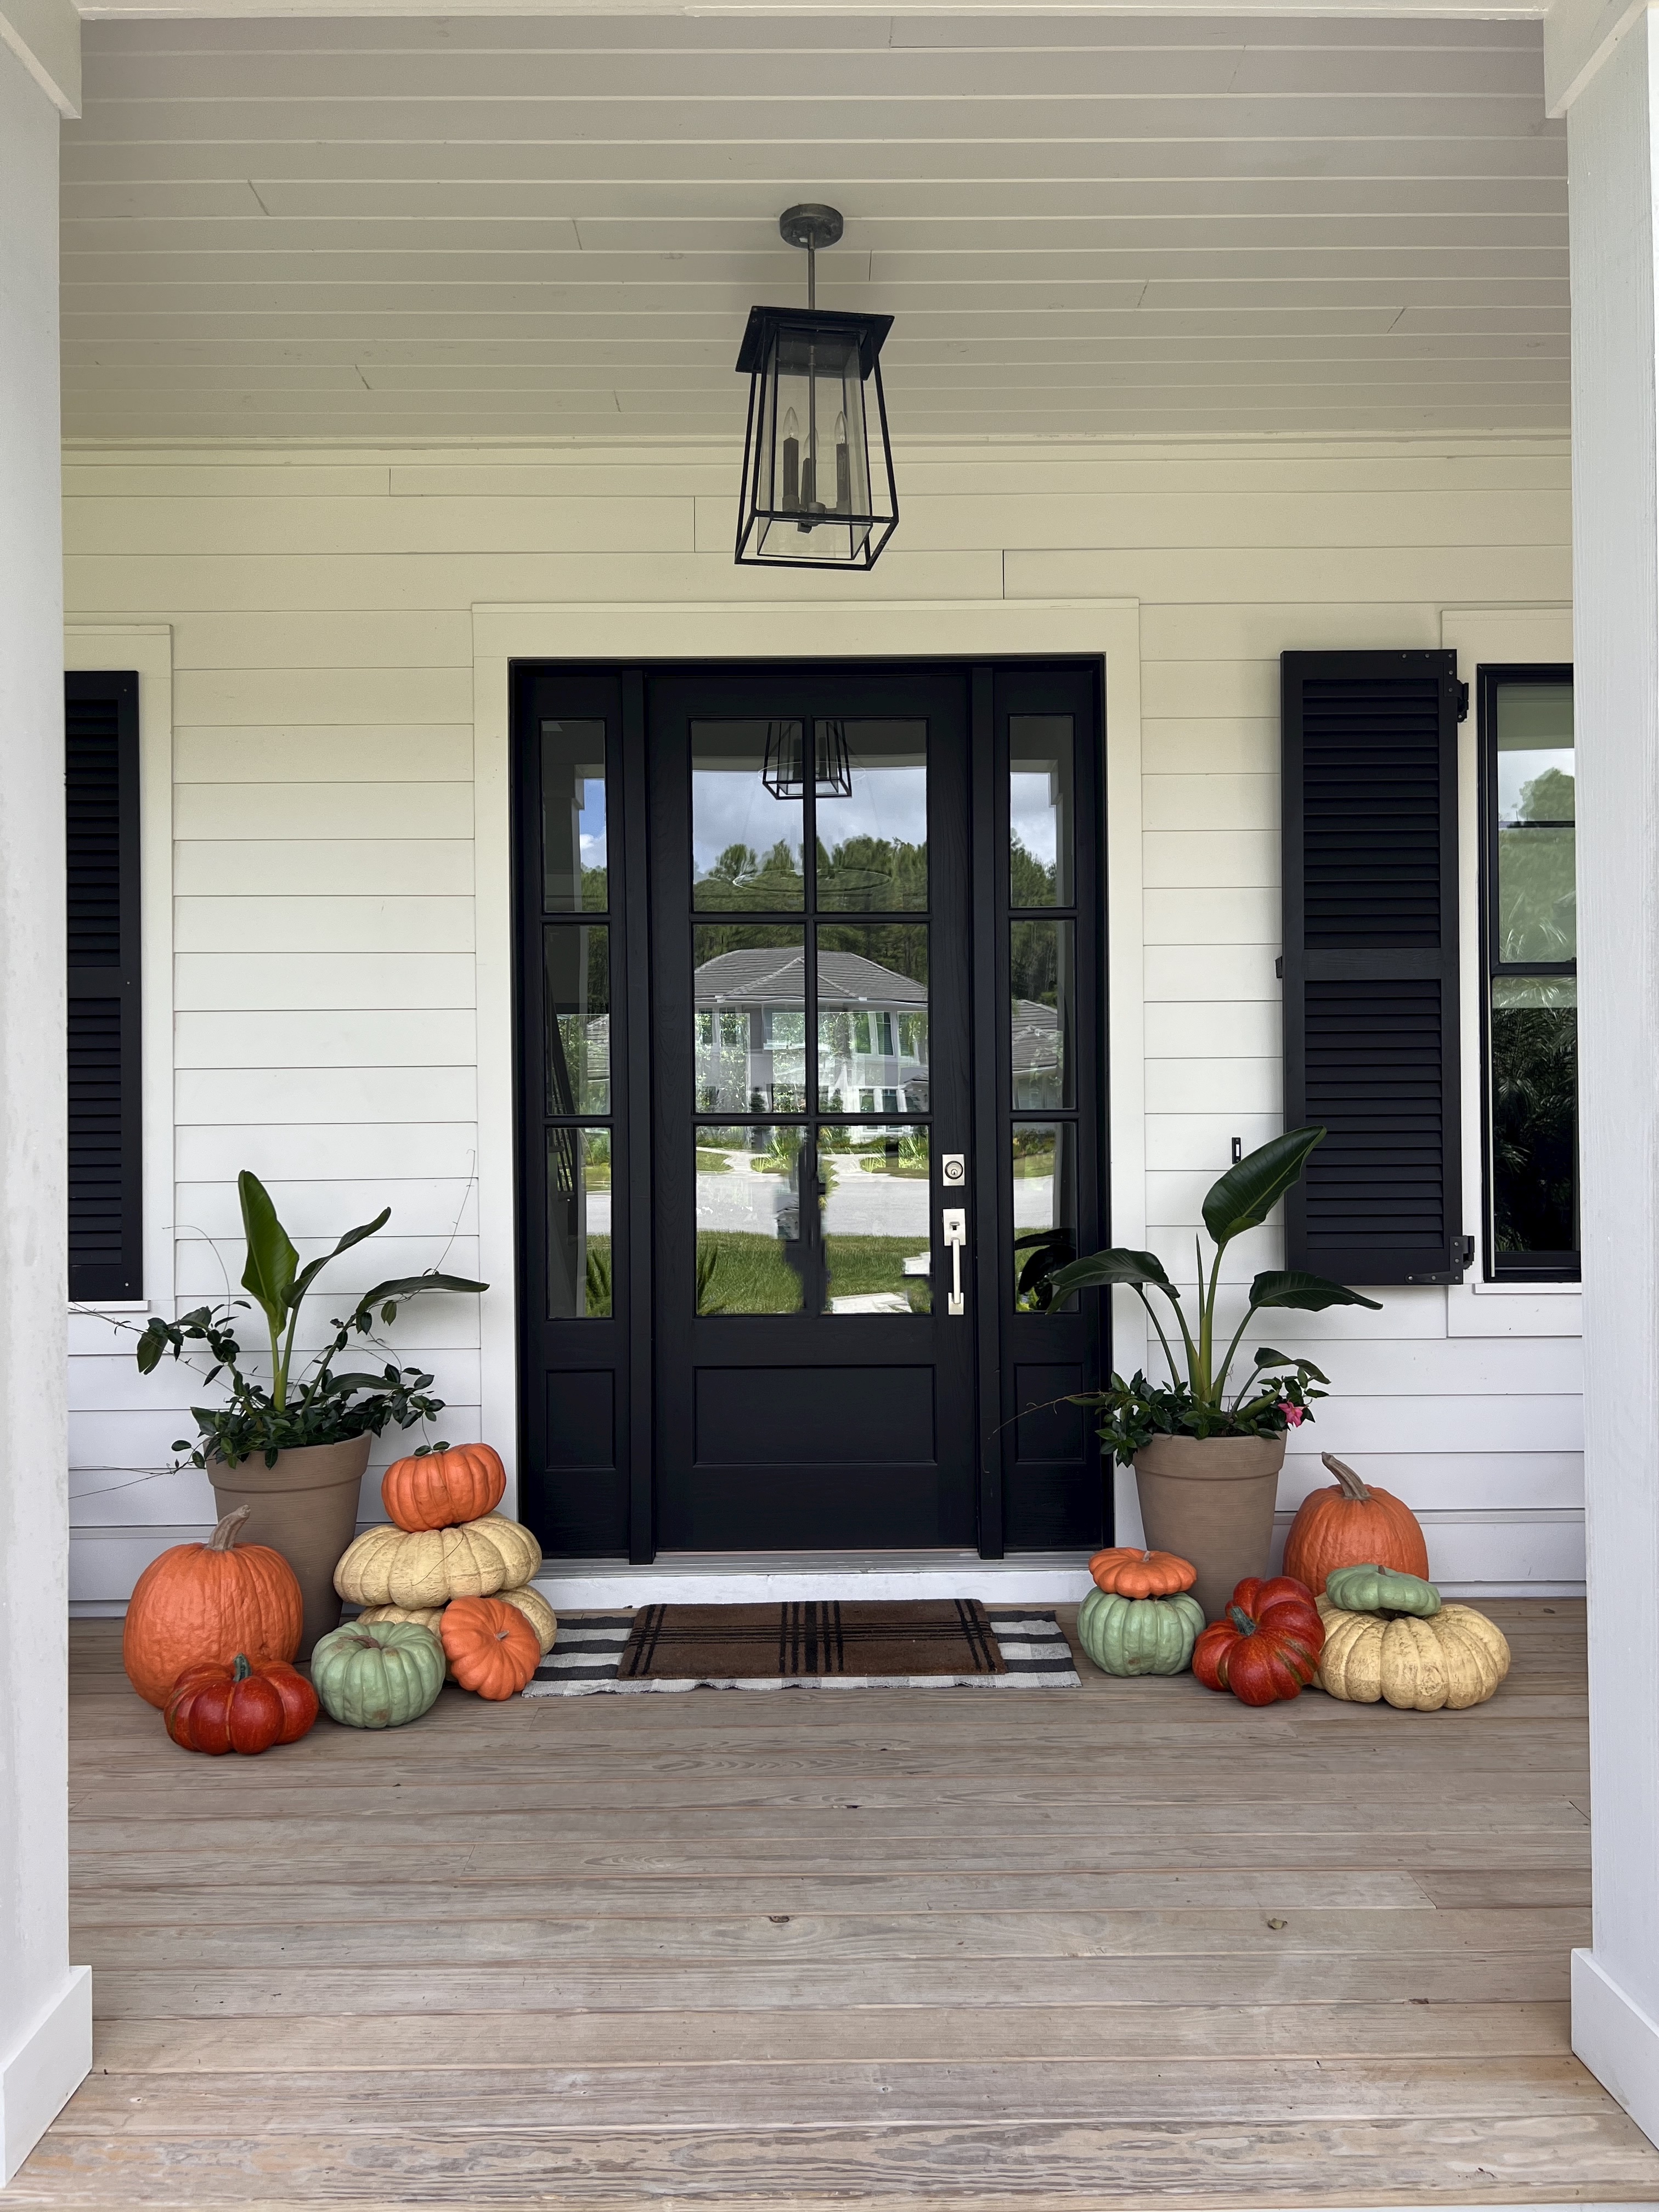 My front porch features a cozy color palette, faux heirloom pumpkins, and a layered welcome mat